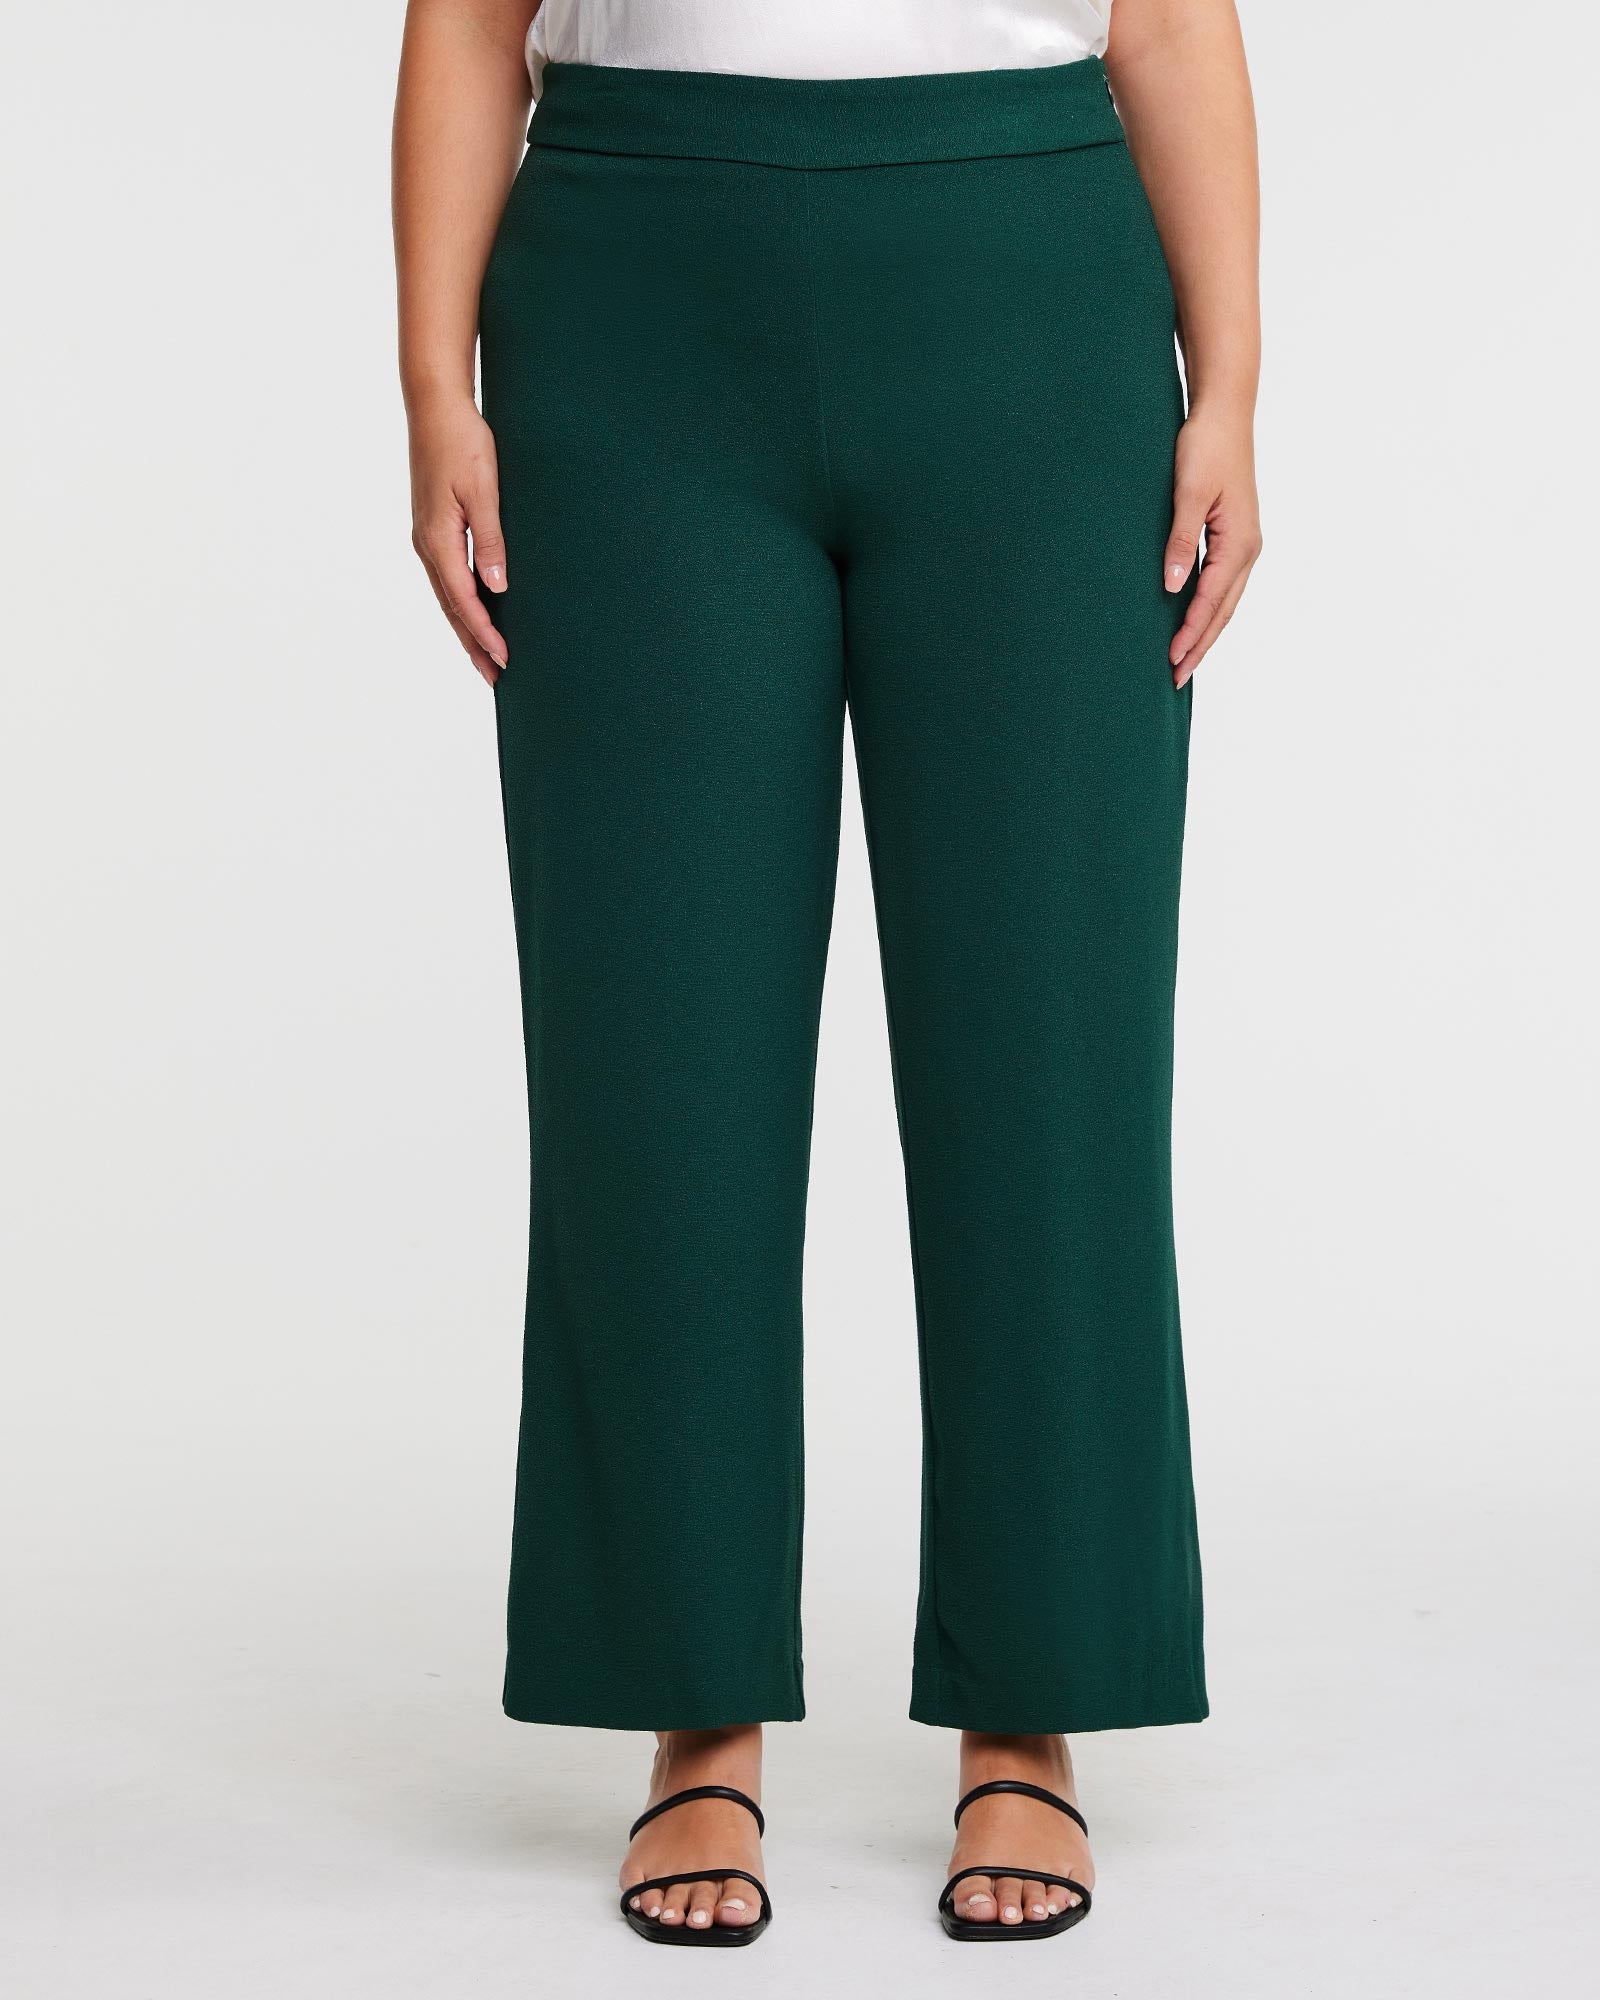 A plus size woman wearing the Estelle Nightlife Green Wide Leg Pant.